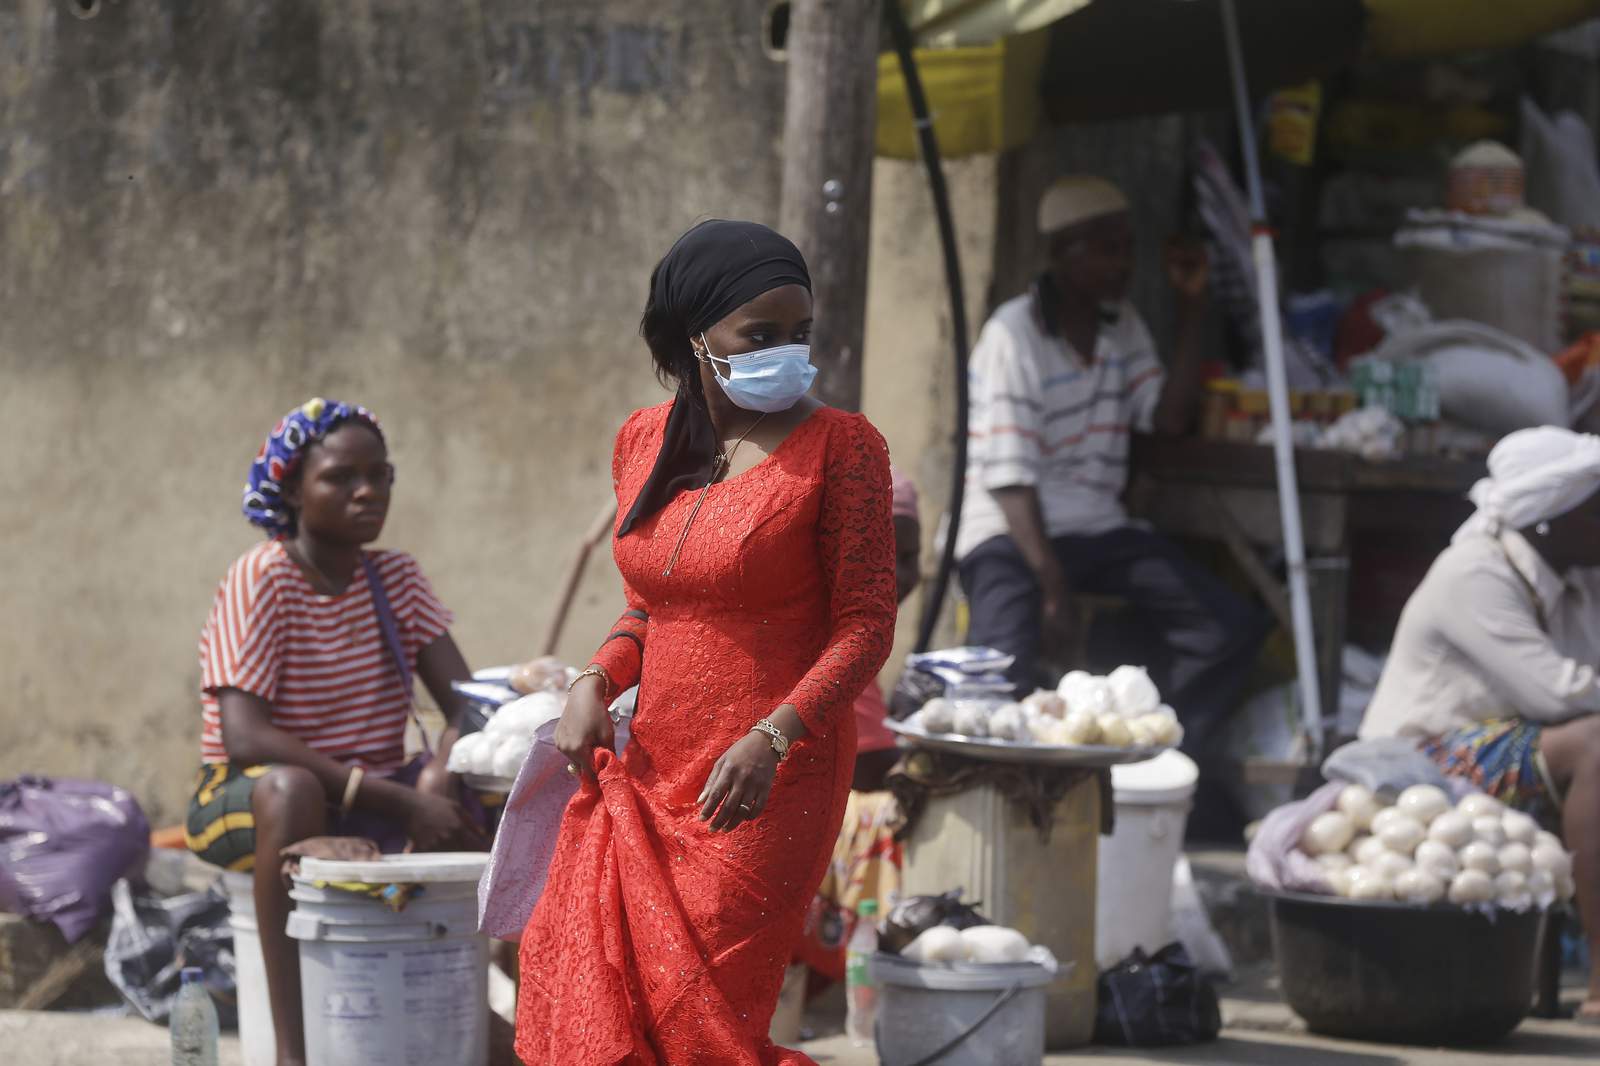 Africa CDC: New virus variant appears to emerge in Nigeria